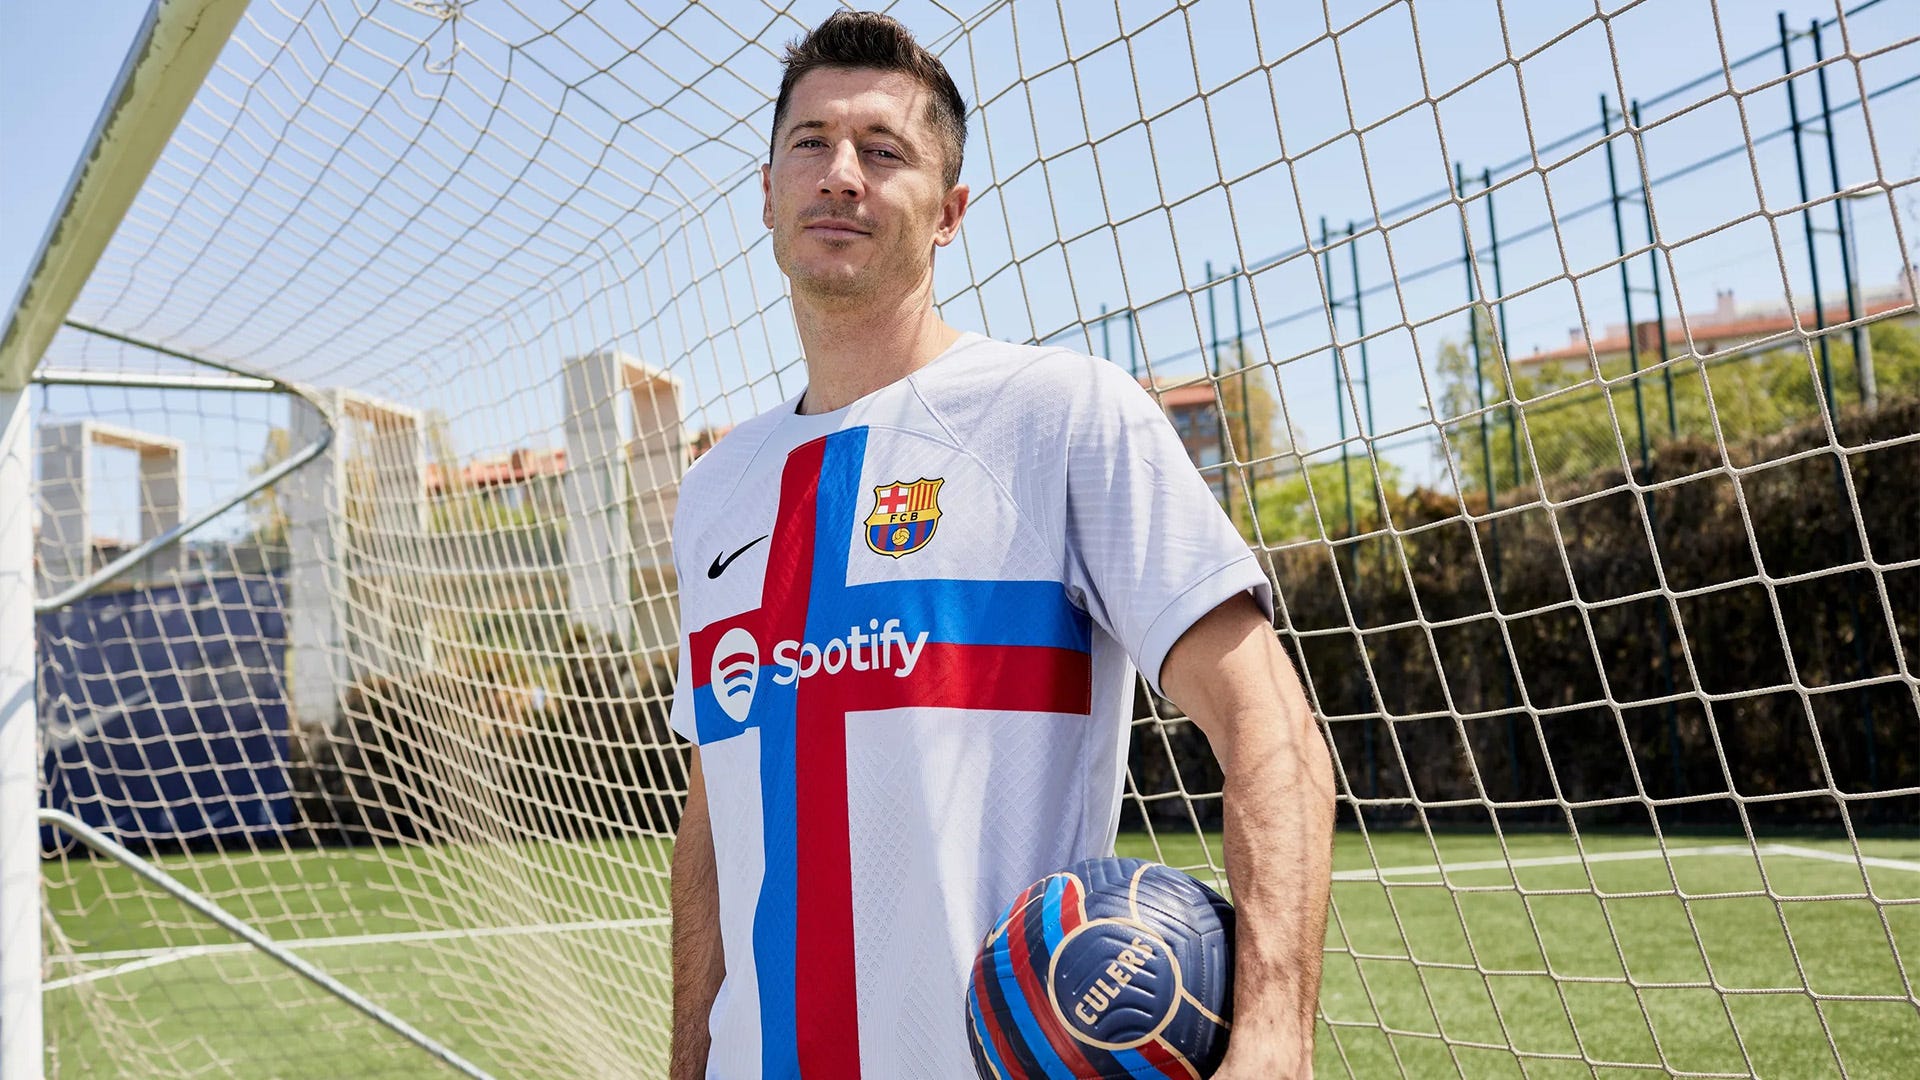 Barcelona and unveil new 2022-23 kit inspired by club's commitment to inclusion diversity | Goal.com US